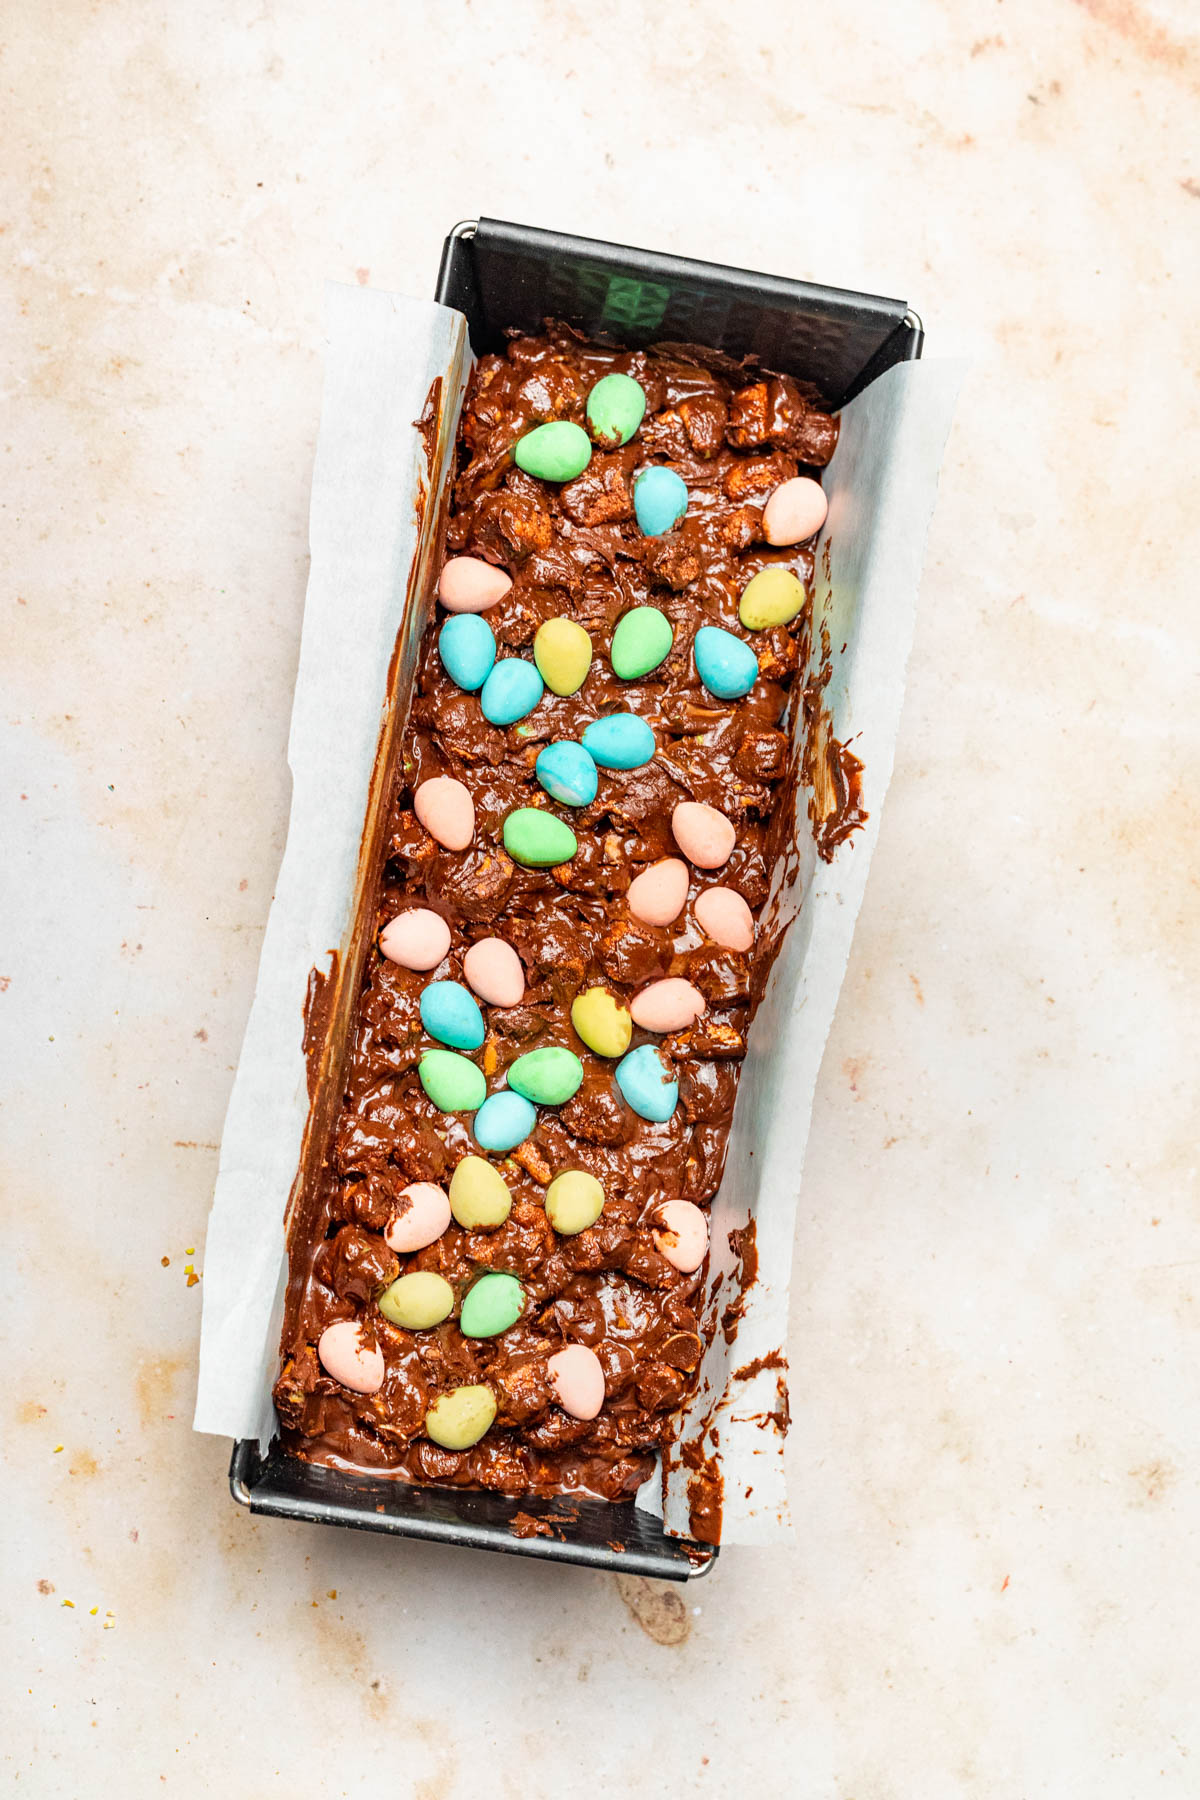 Rocky road topped with extra mini eggs.